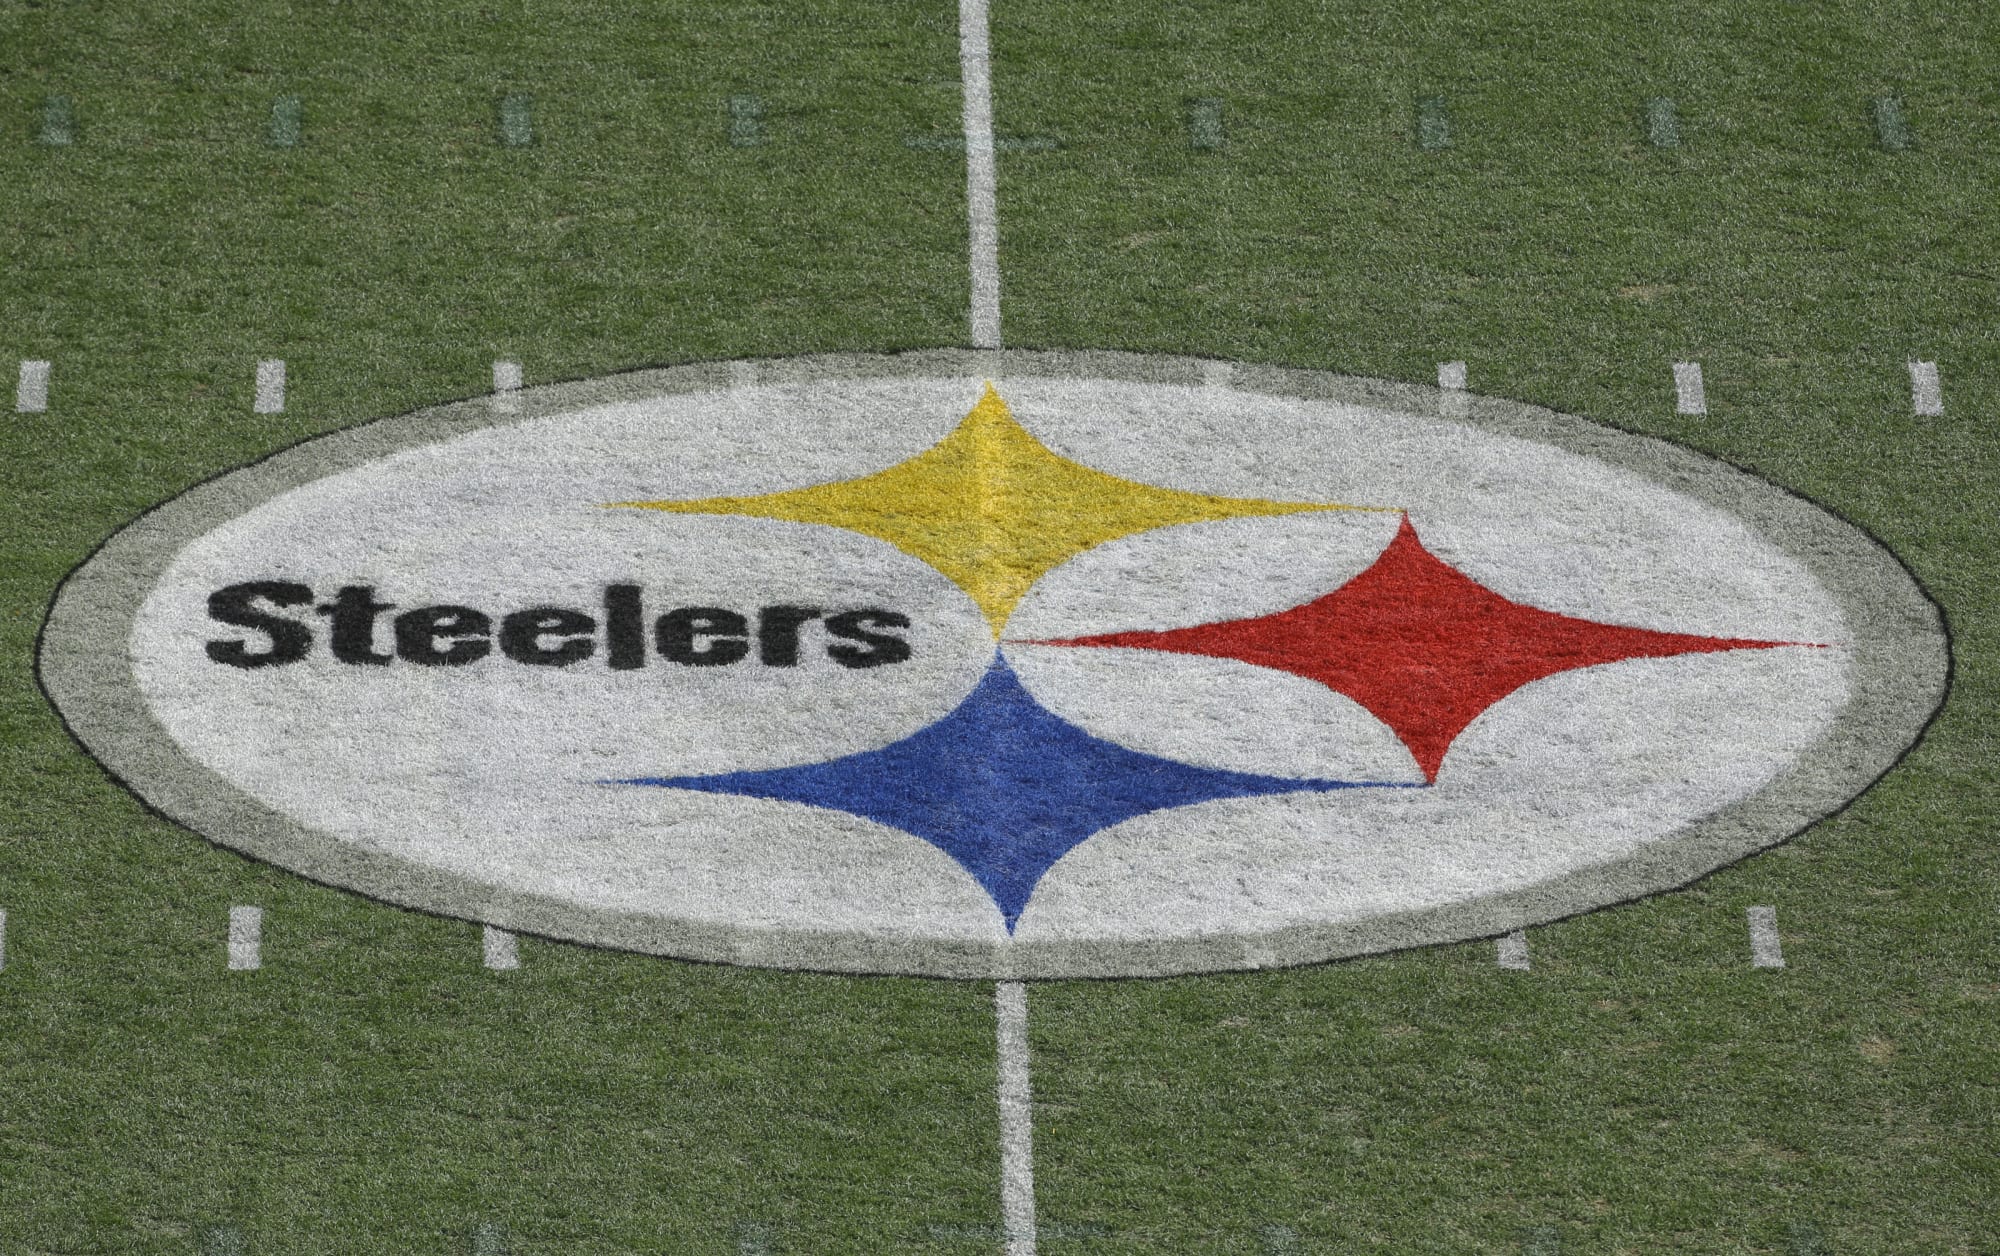 Steelers reportedly name new general manager after long search